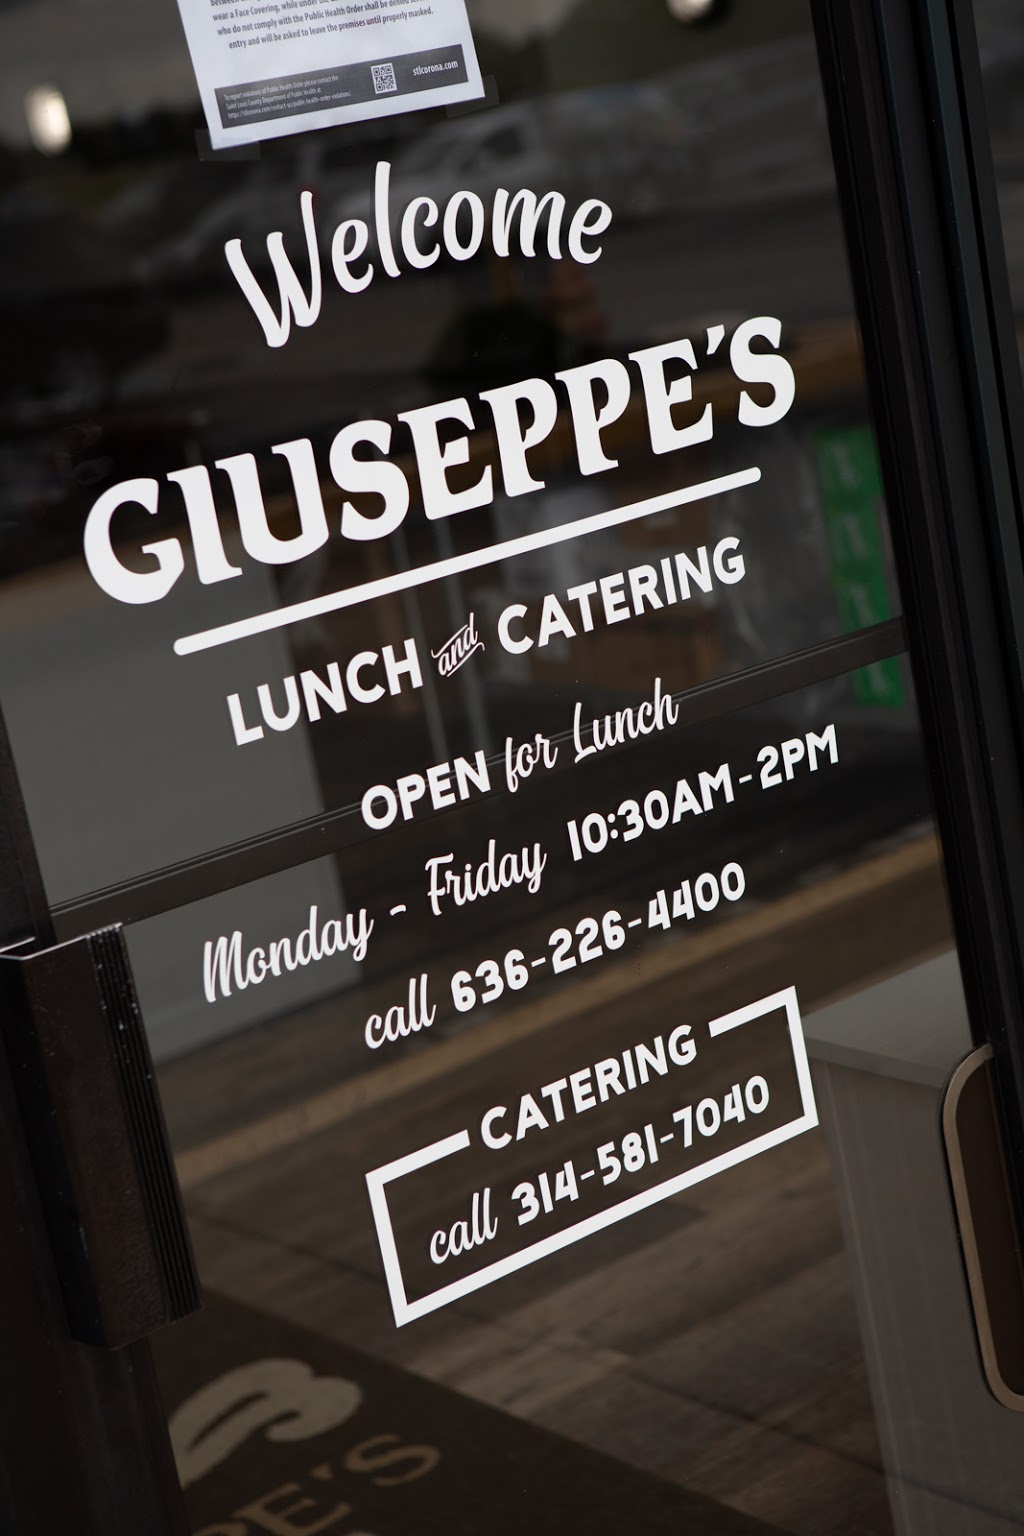 Giuseppes Restaurant and Catering | 972 S Hwy Dr, Fenton, MO 63026, USA | Phone: (636) 226-4400